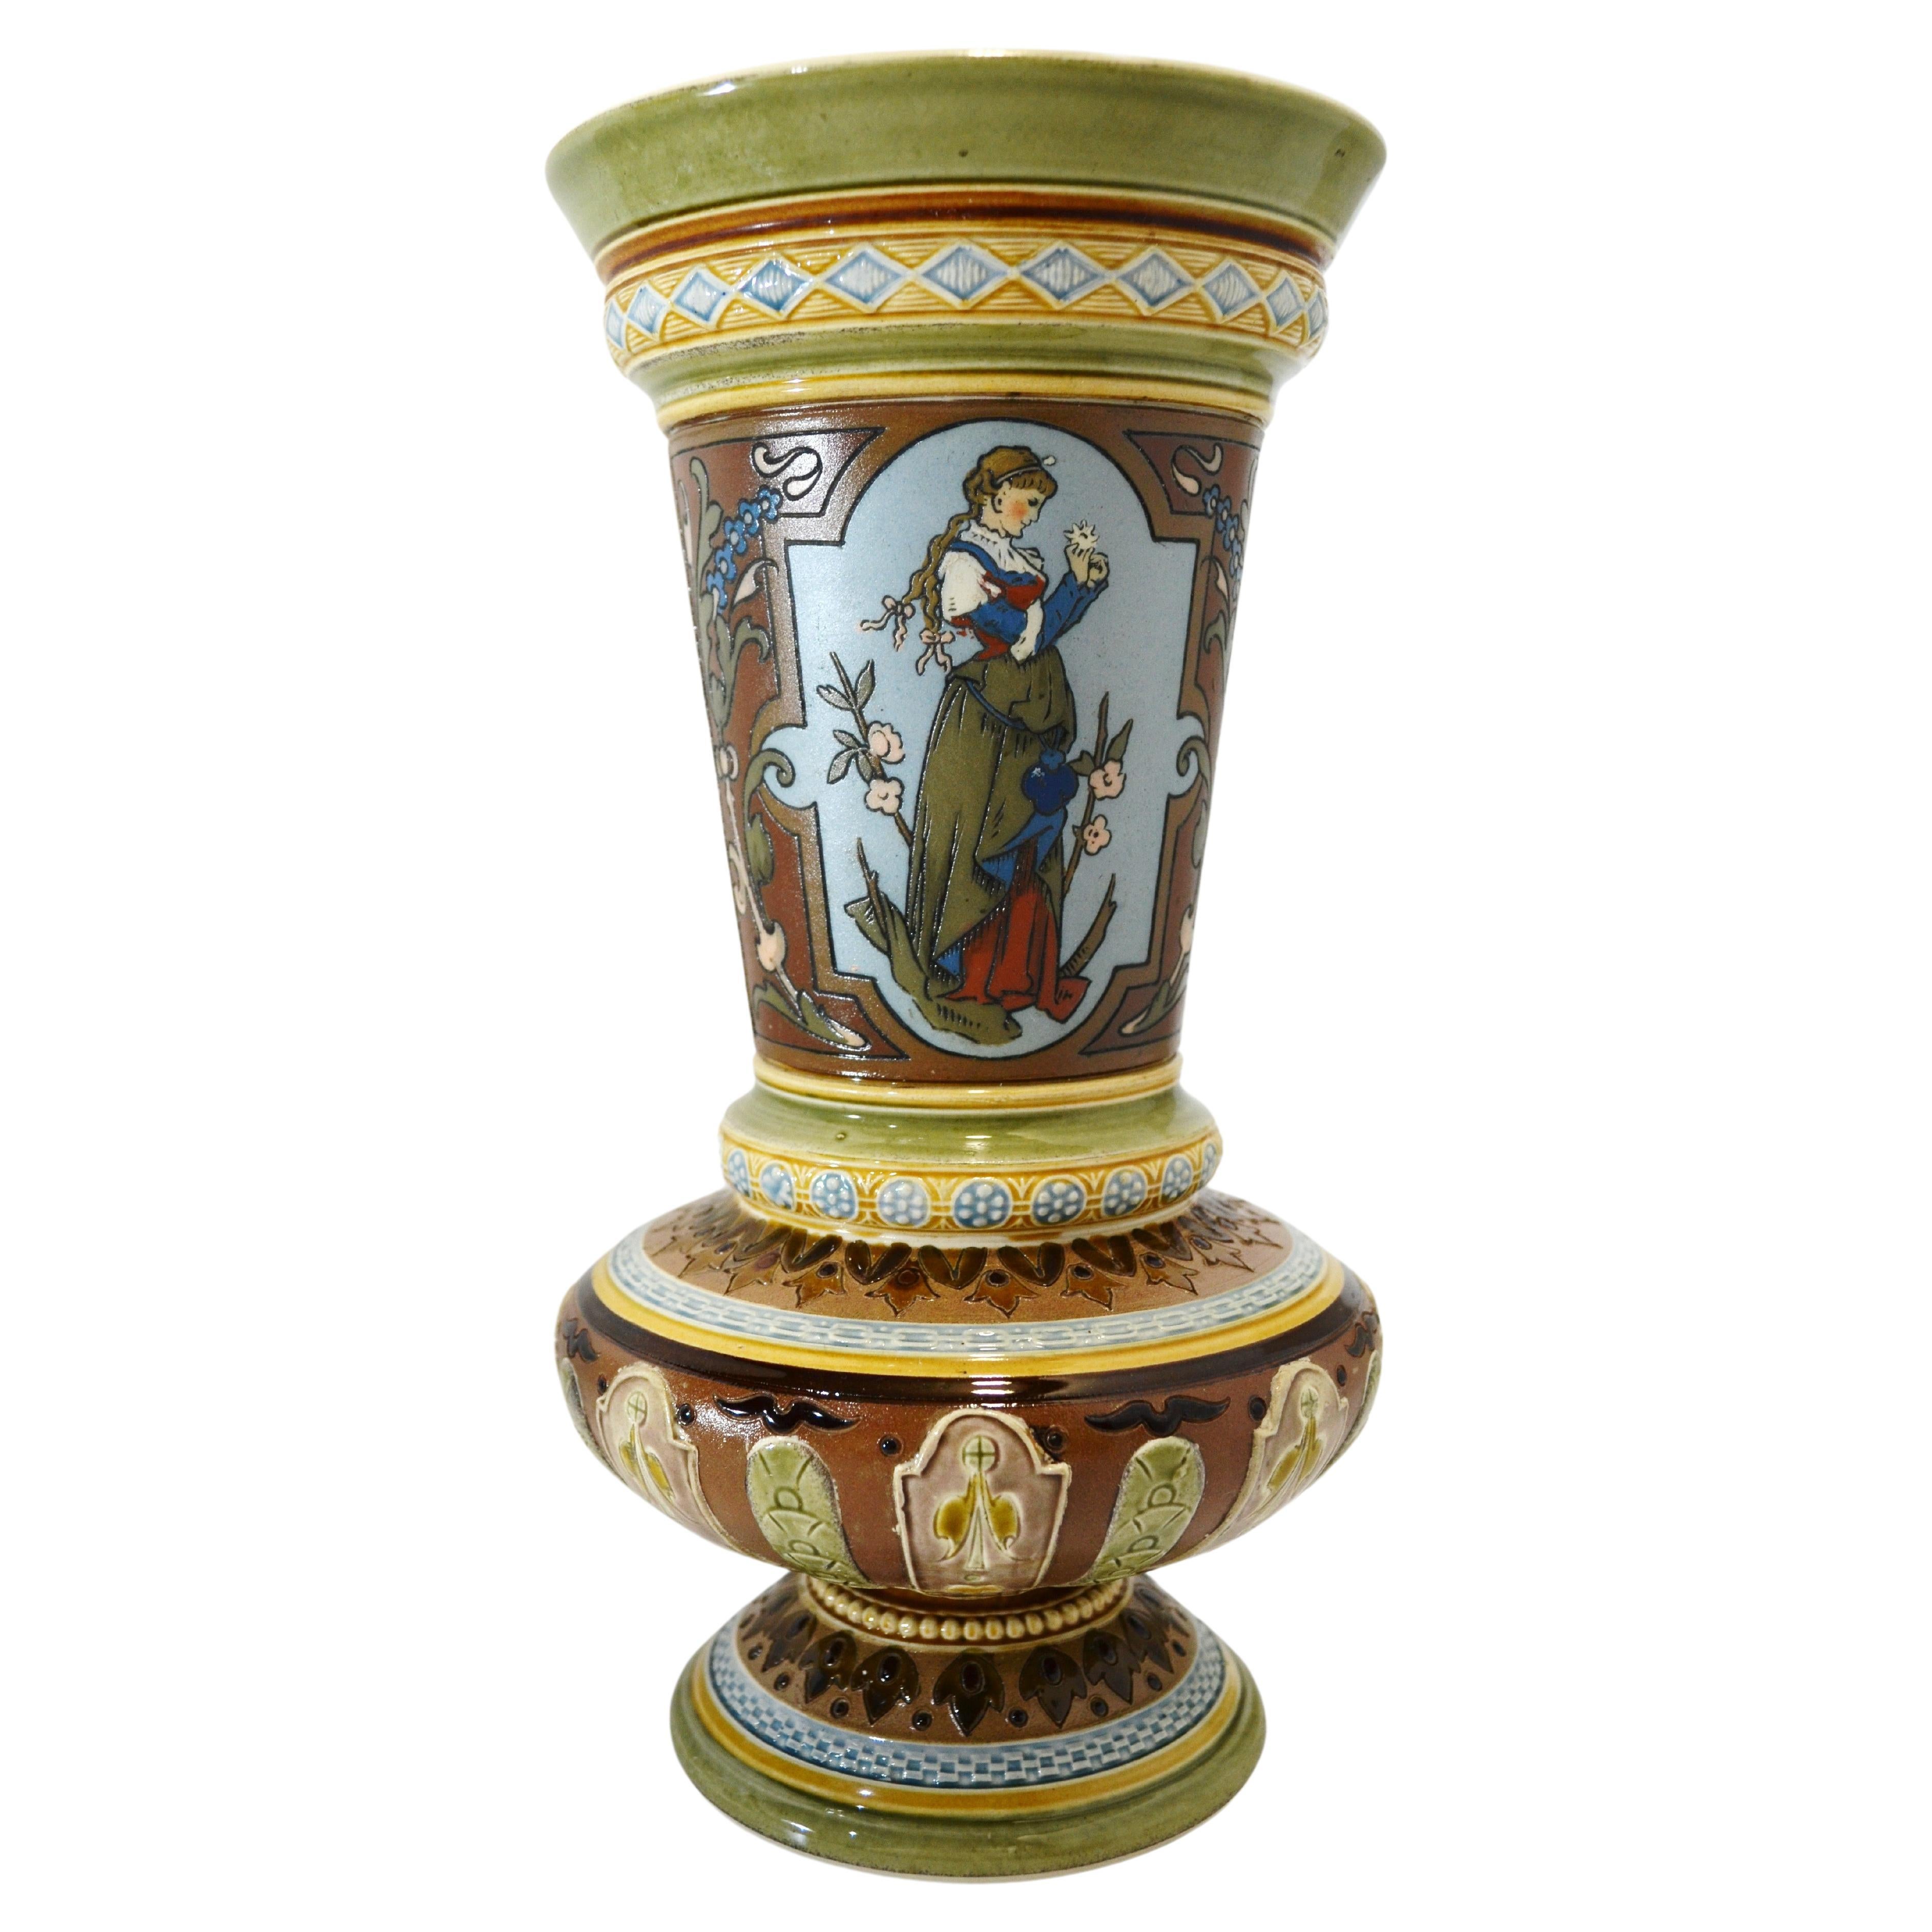 Villeroy and Boch Mettlach 1890 1900 Mosaic Ceramic Vase Decorated with Women For Sale